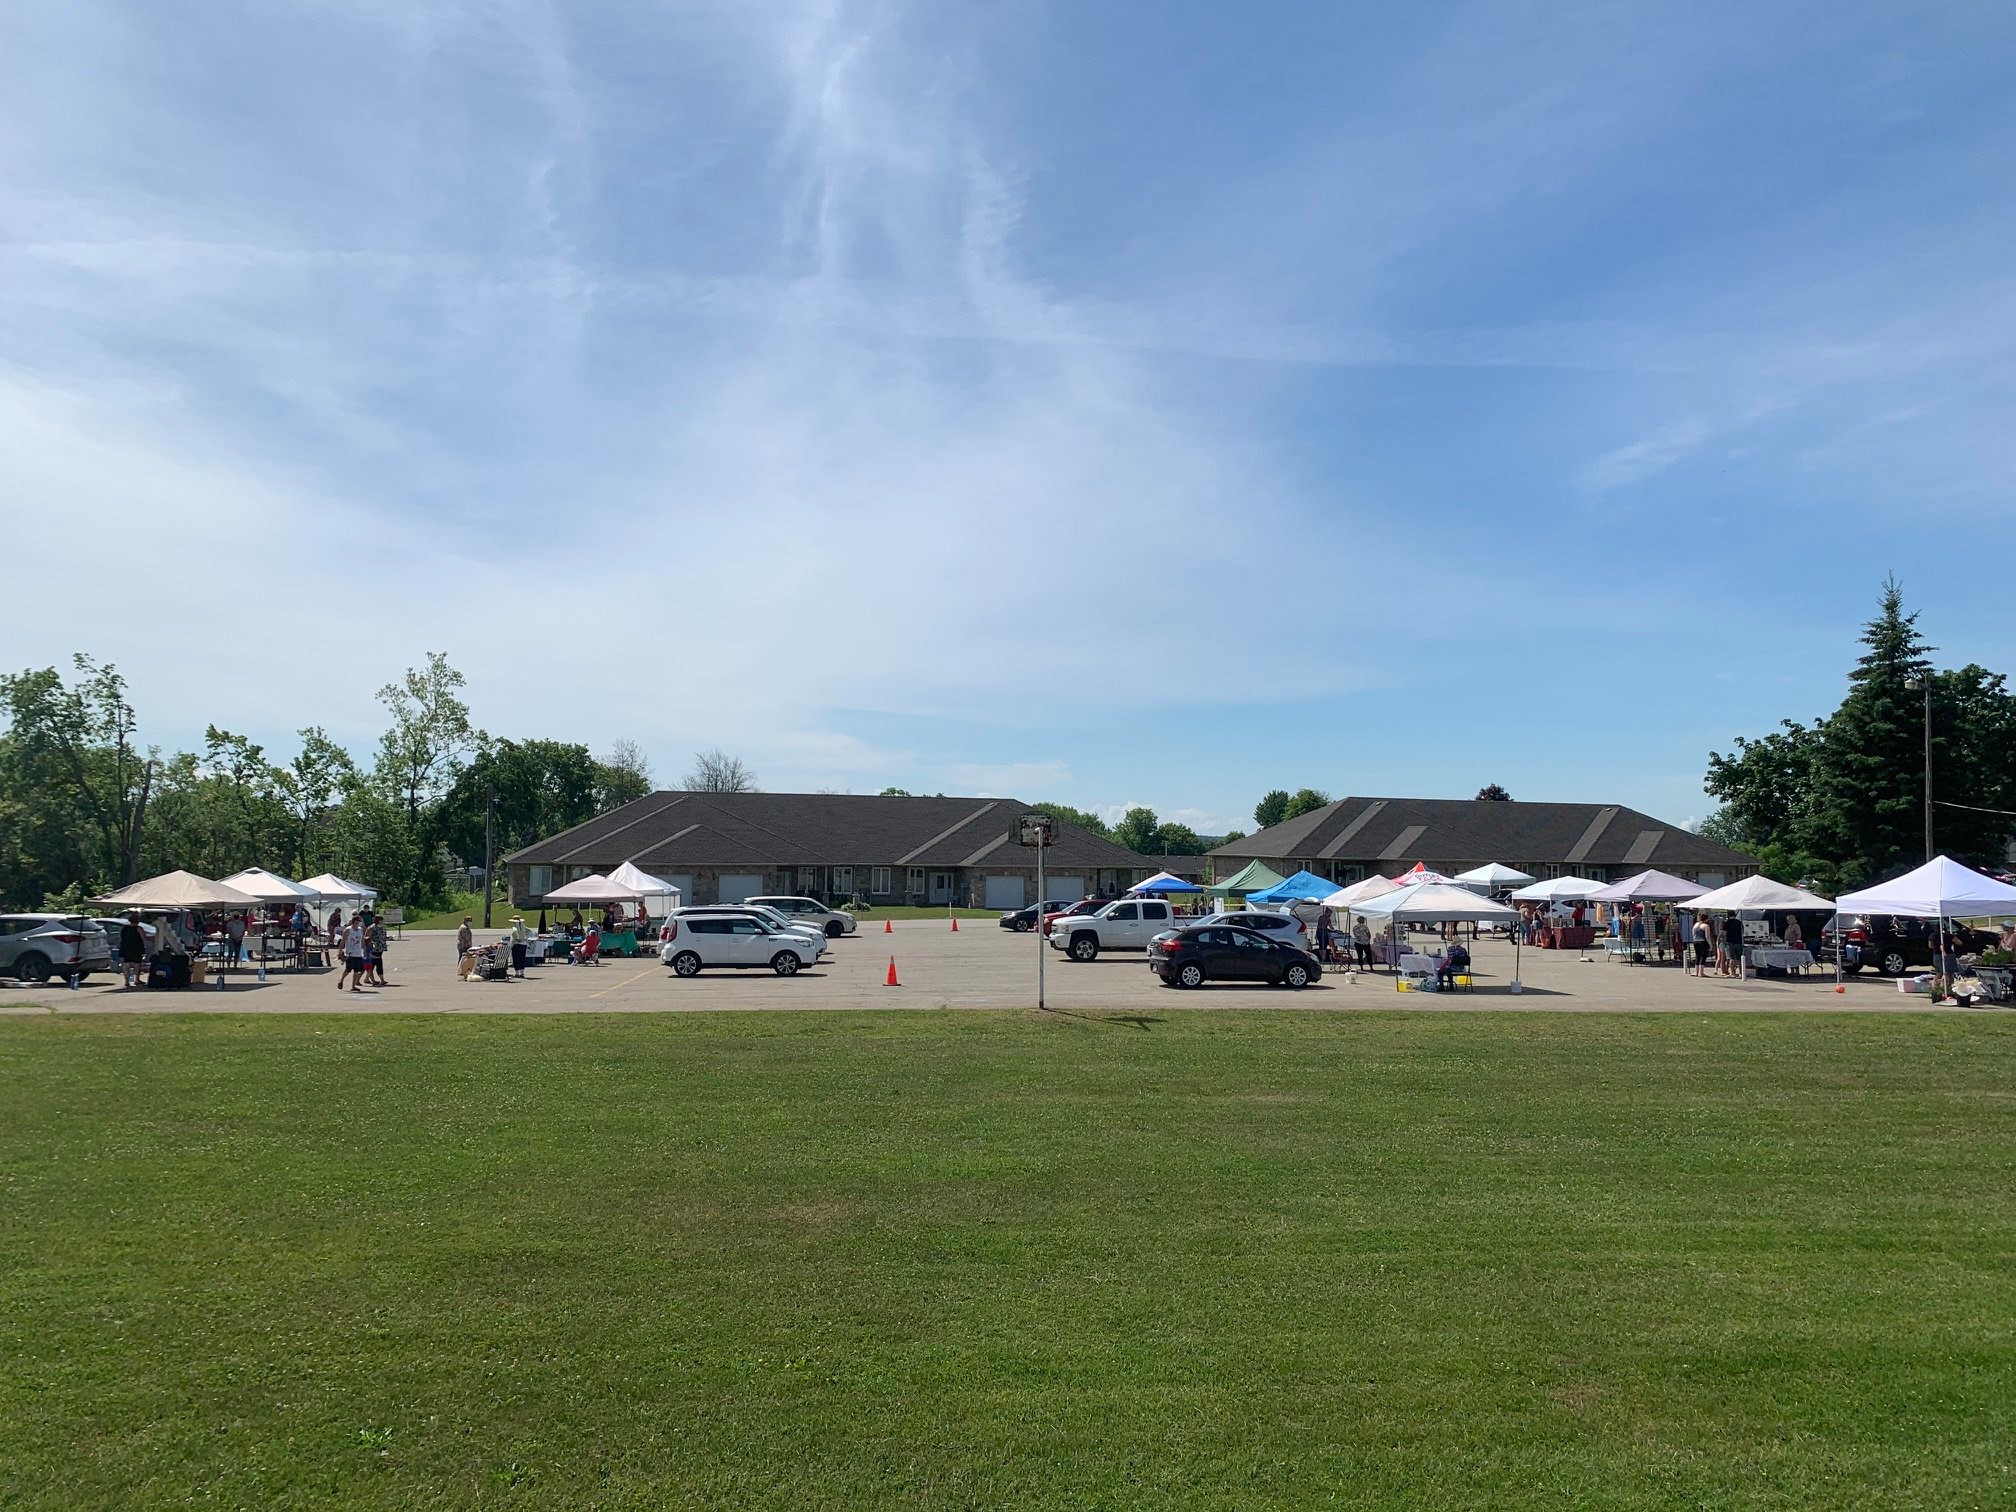 tents set up at the farmer's & craft market June 12, 2021